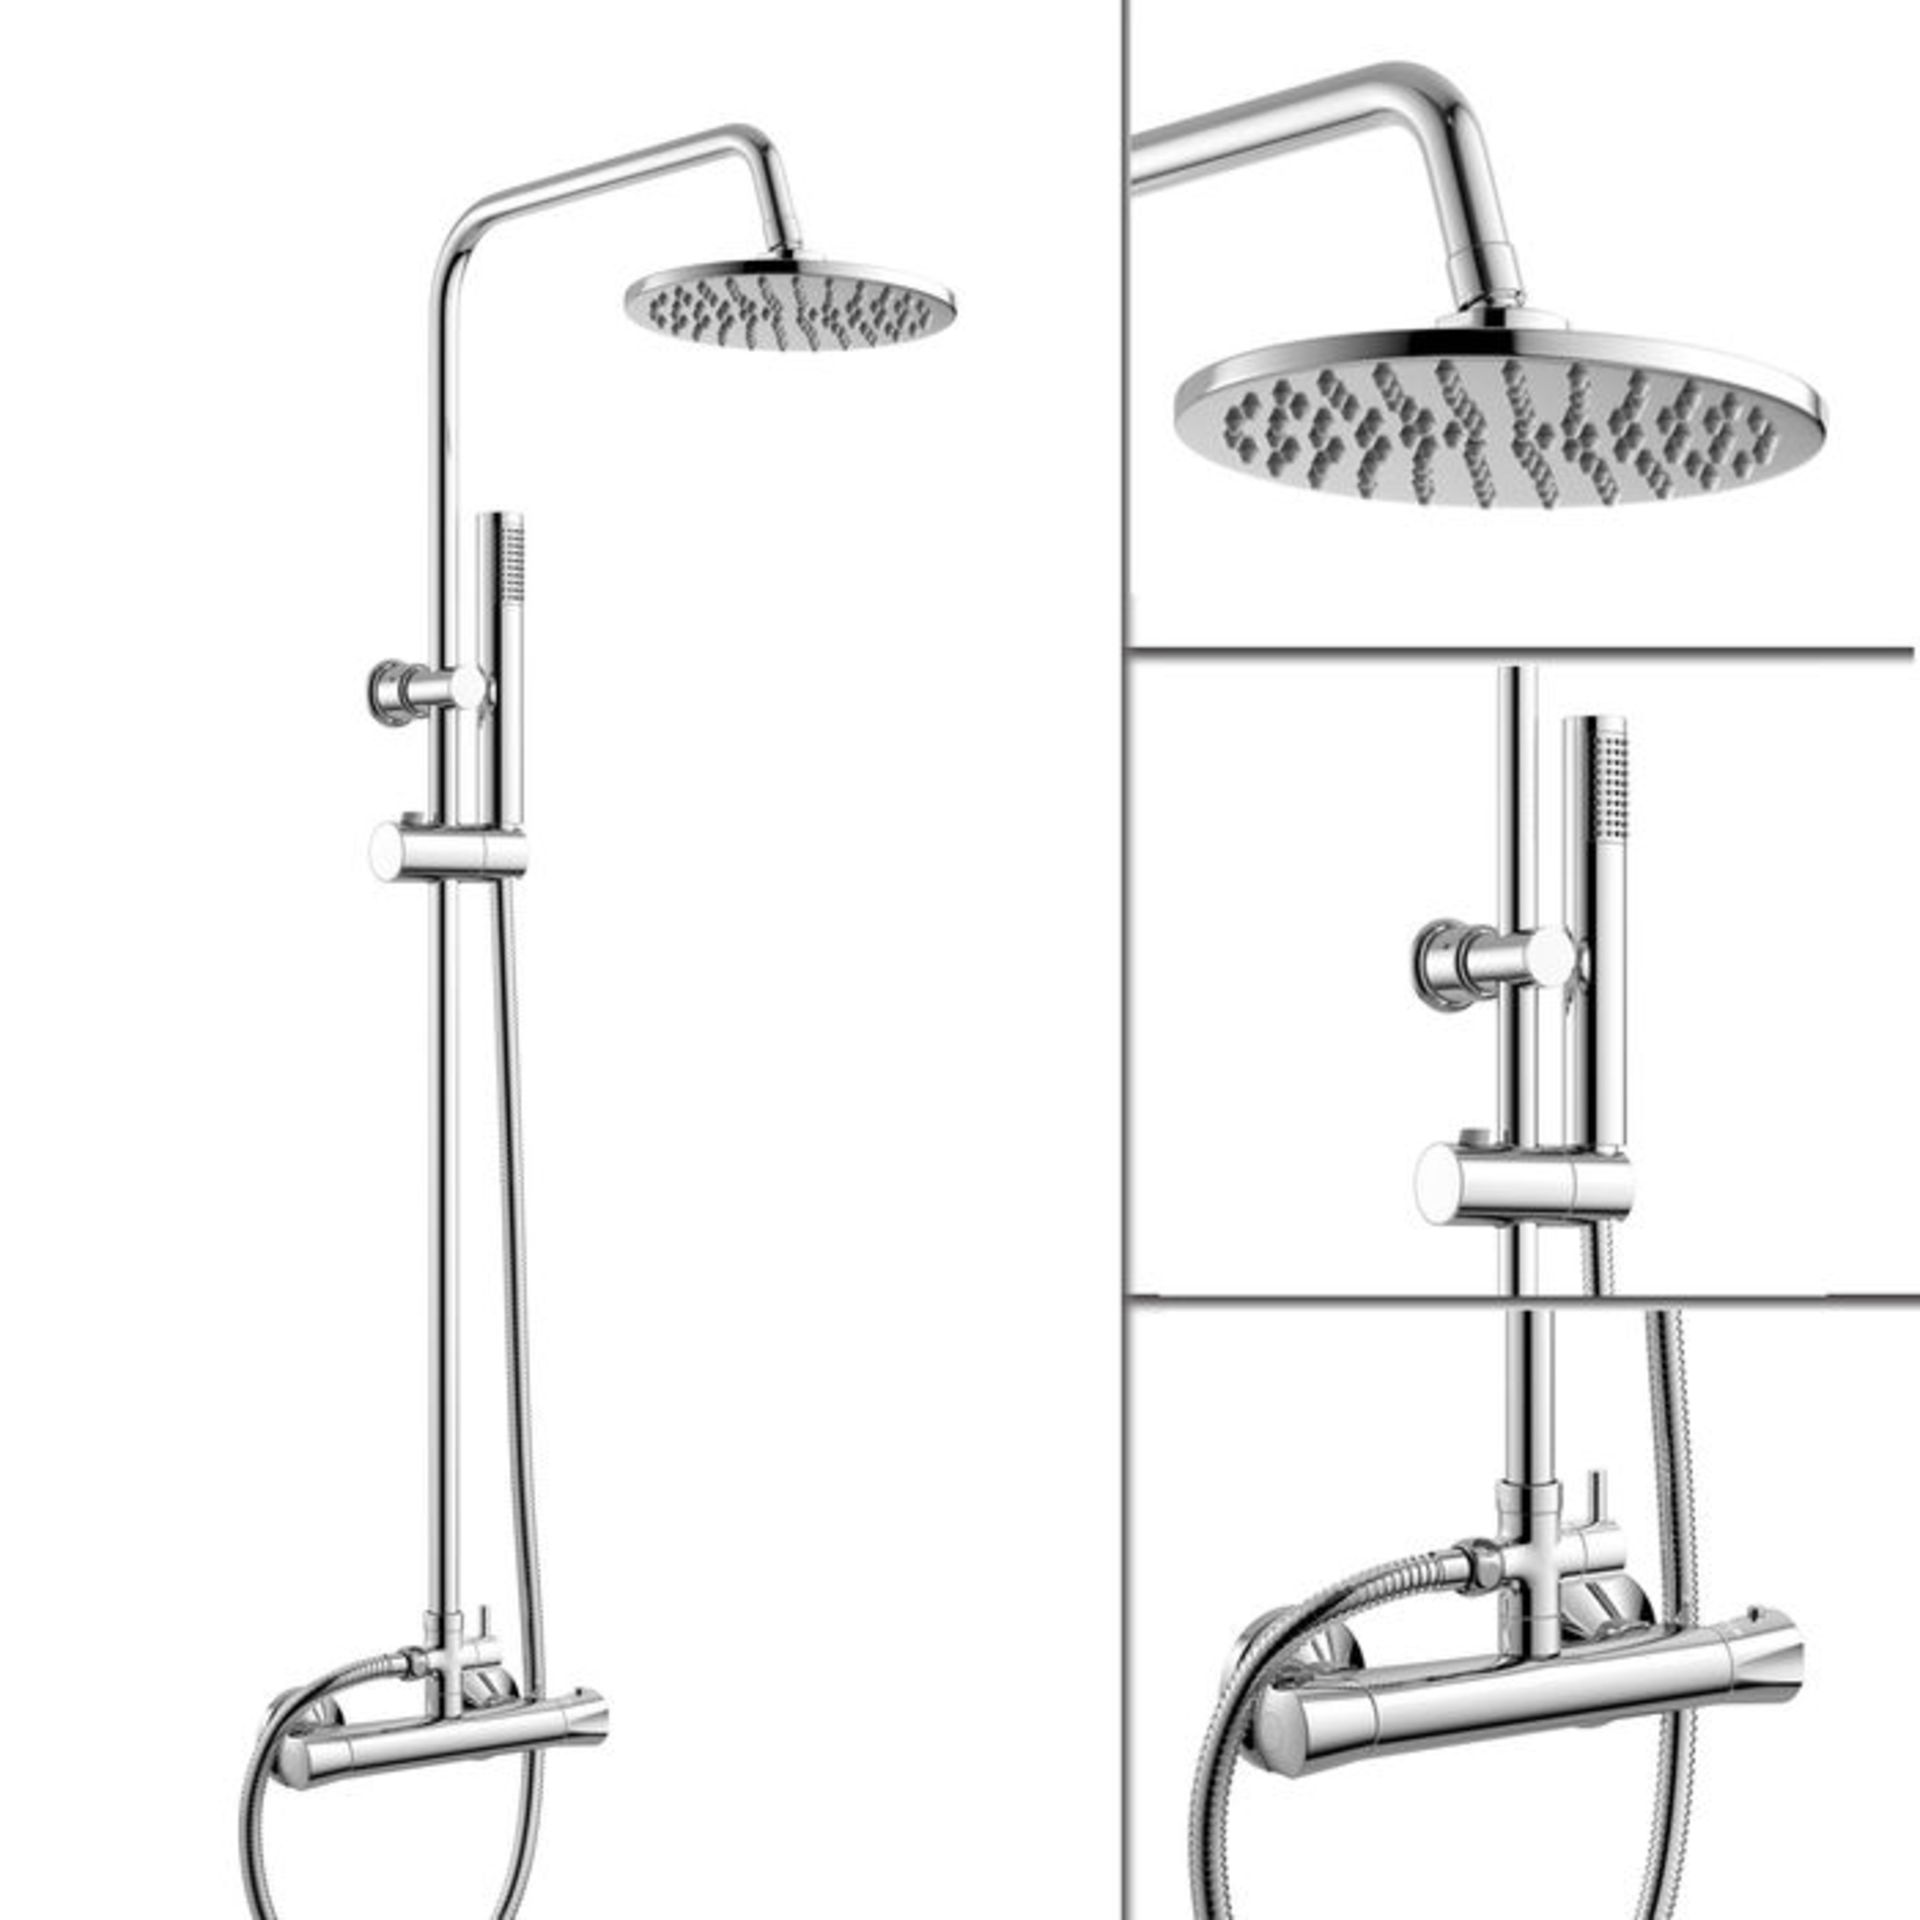 (CT154) Round Exposed Thermostatic Shower Kit & Head. Shower head features a tilt action for maximum - Bild 2 aus 2